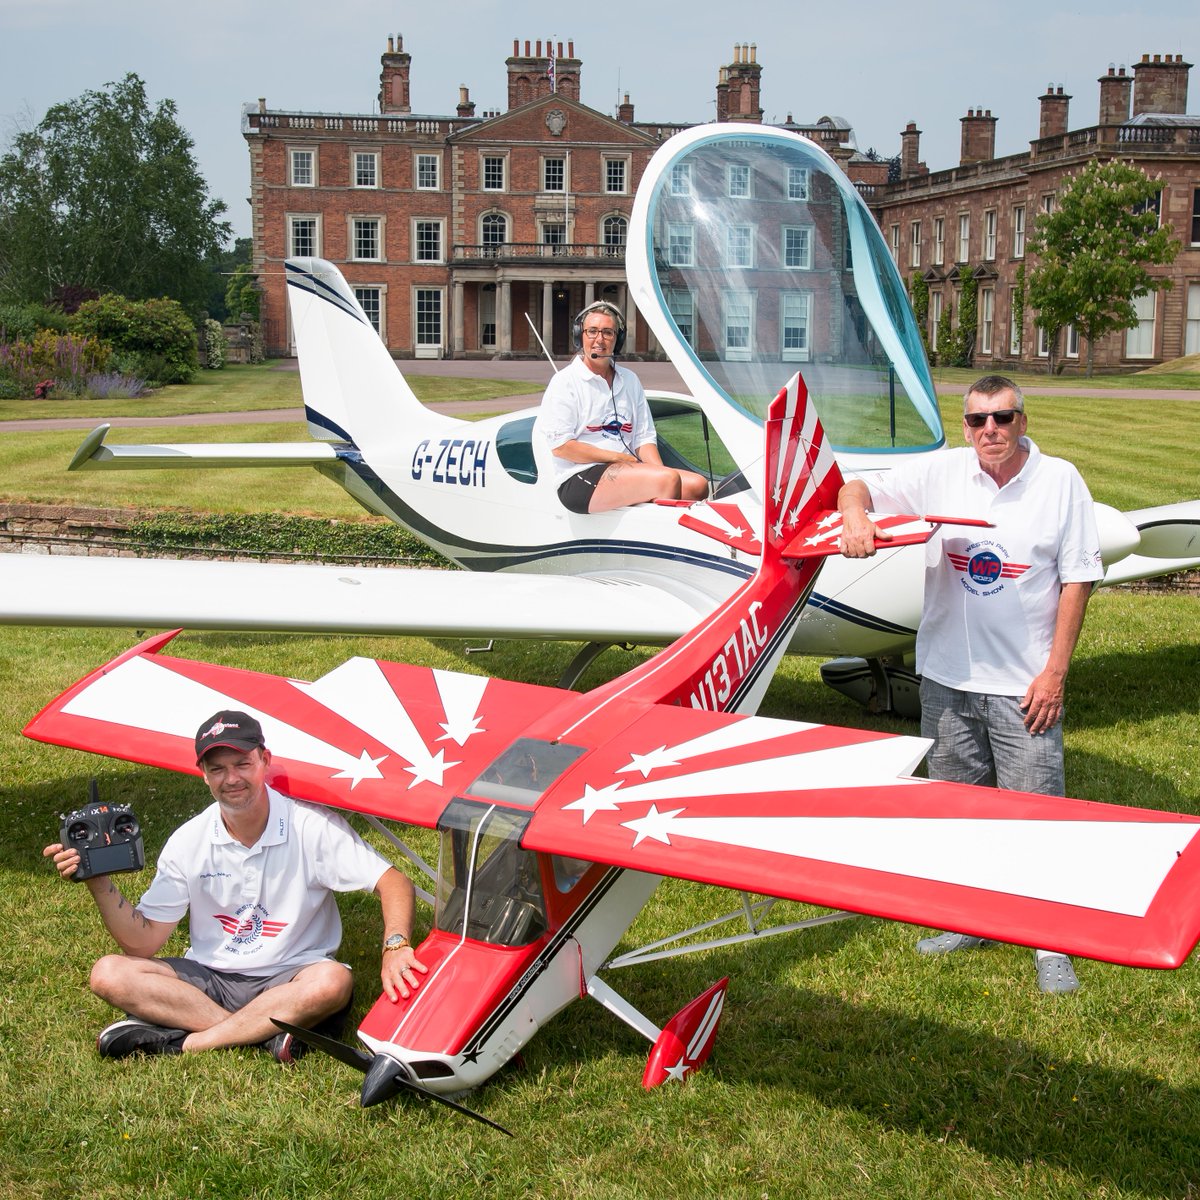 BOOK NOW: @Weston_Park Air Show International returns from 14-16 June. 🛩 Watch top model pilots take to the skies, enjoy delicious food and drink, explore an exceptional trade line up and so much more. Read more here 👉 tinyurl.com/mtehs8u8